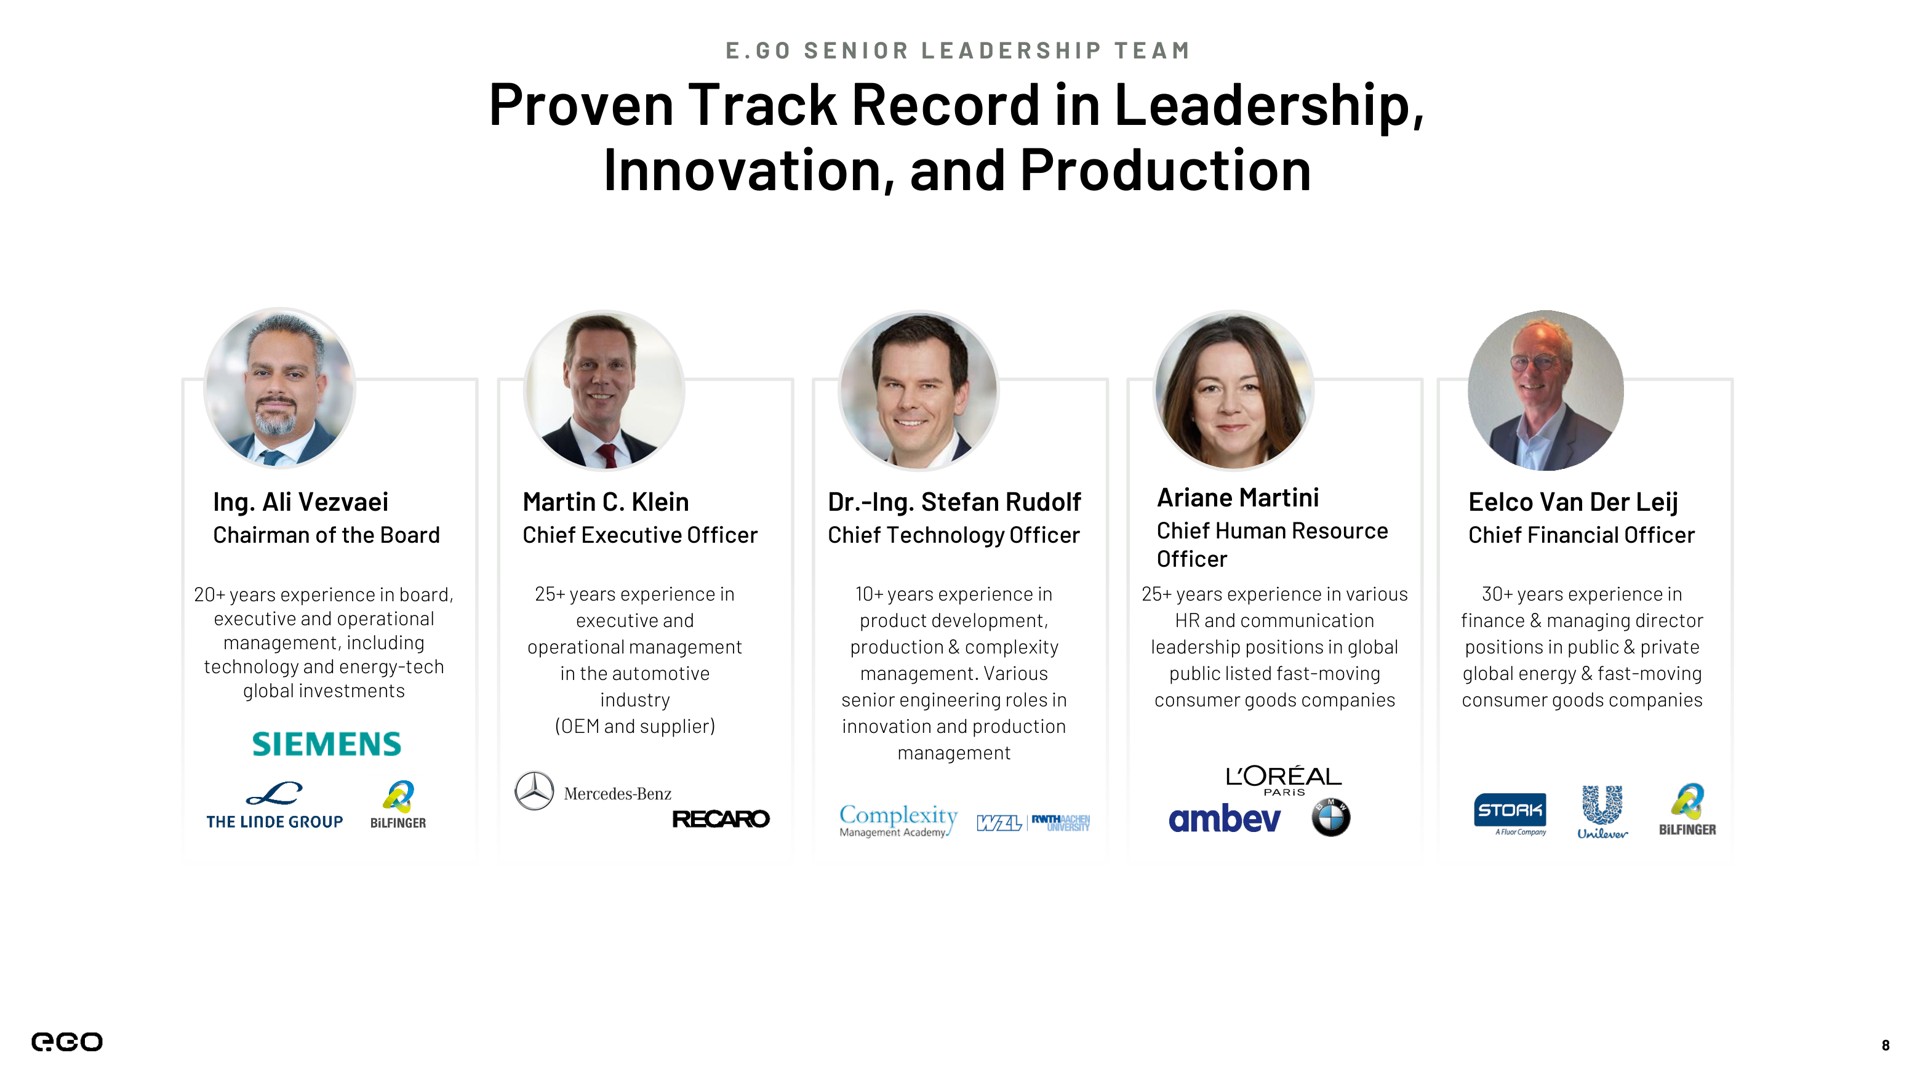 proven track record in leadership innovation and production | Next.e.GO